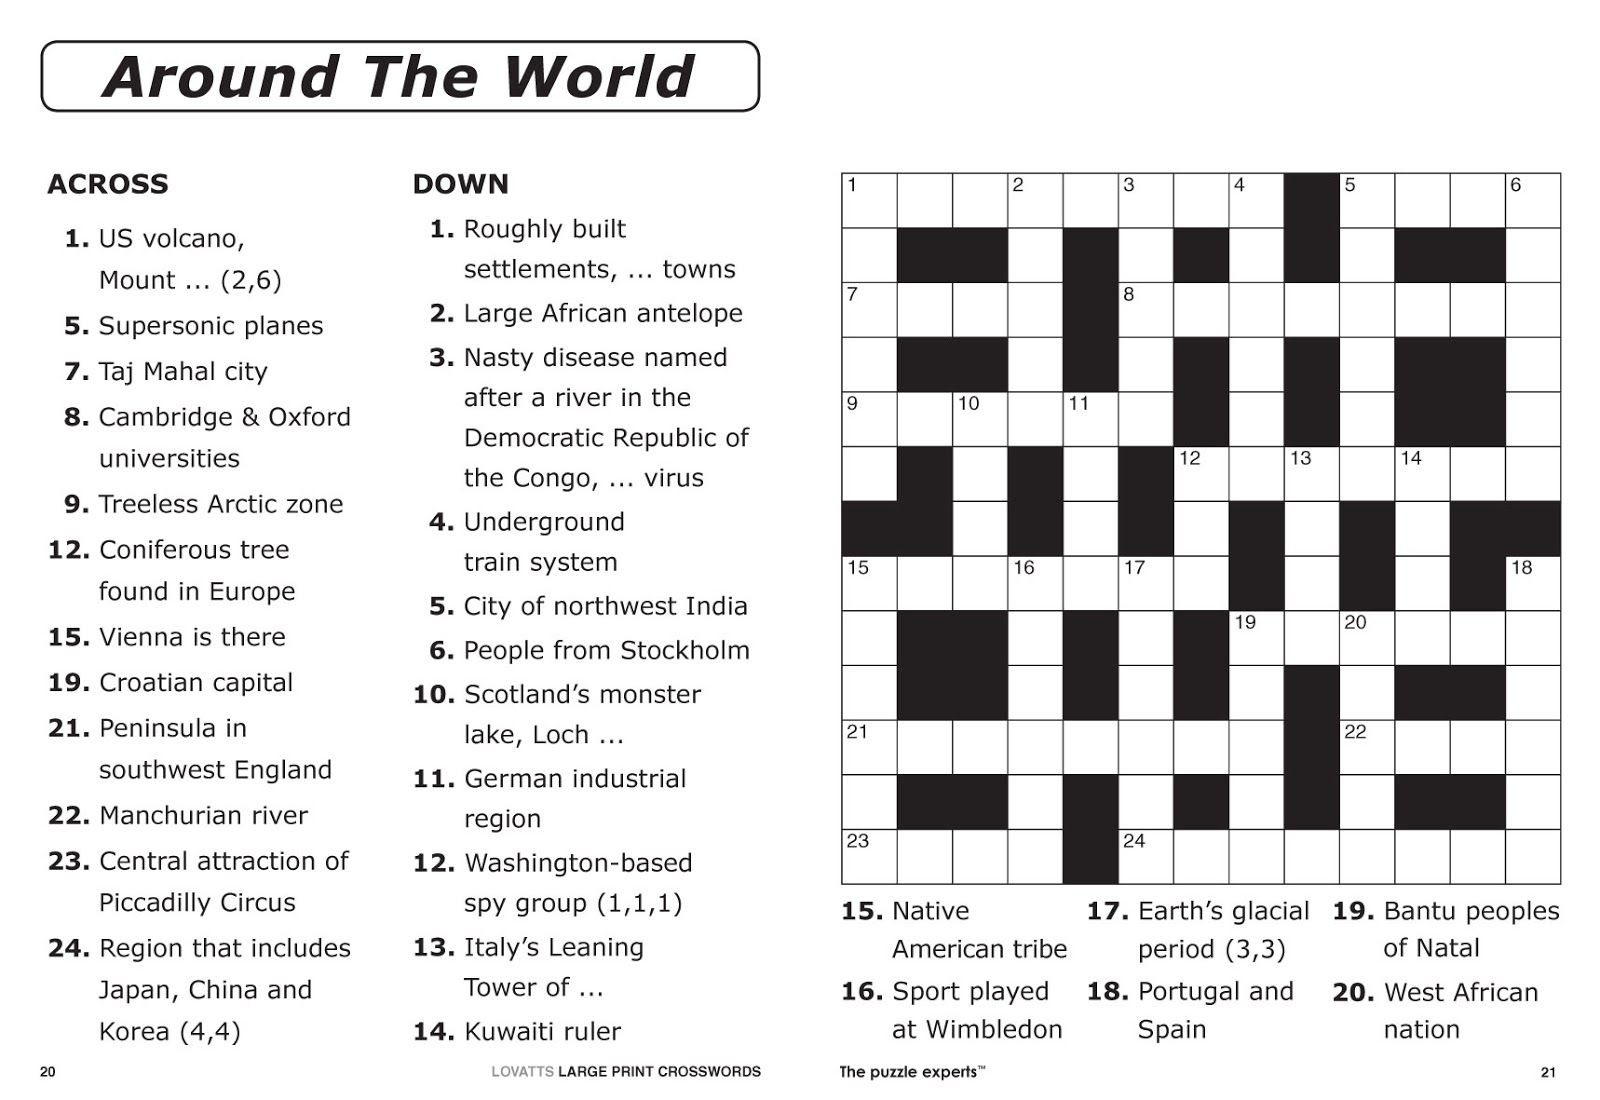 Free Printable Large Print Crossword Puzzles | M3U8 - Free Printable Puzzles For 9 Year Olds